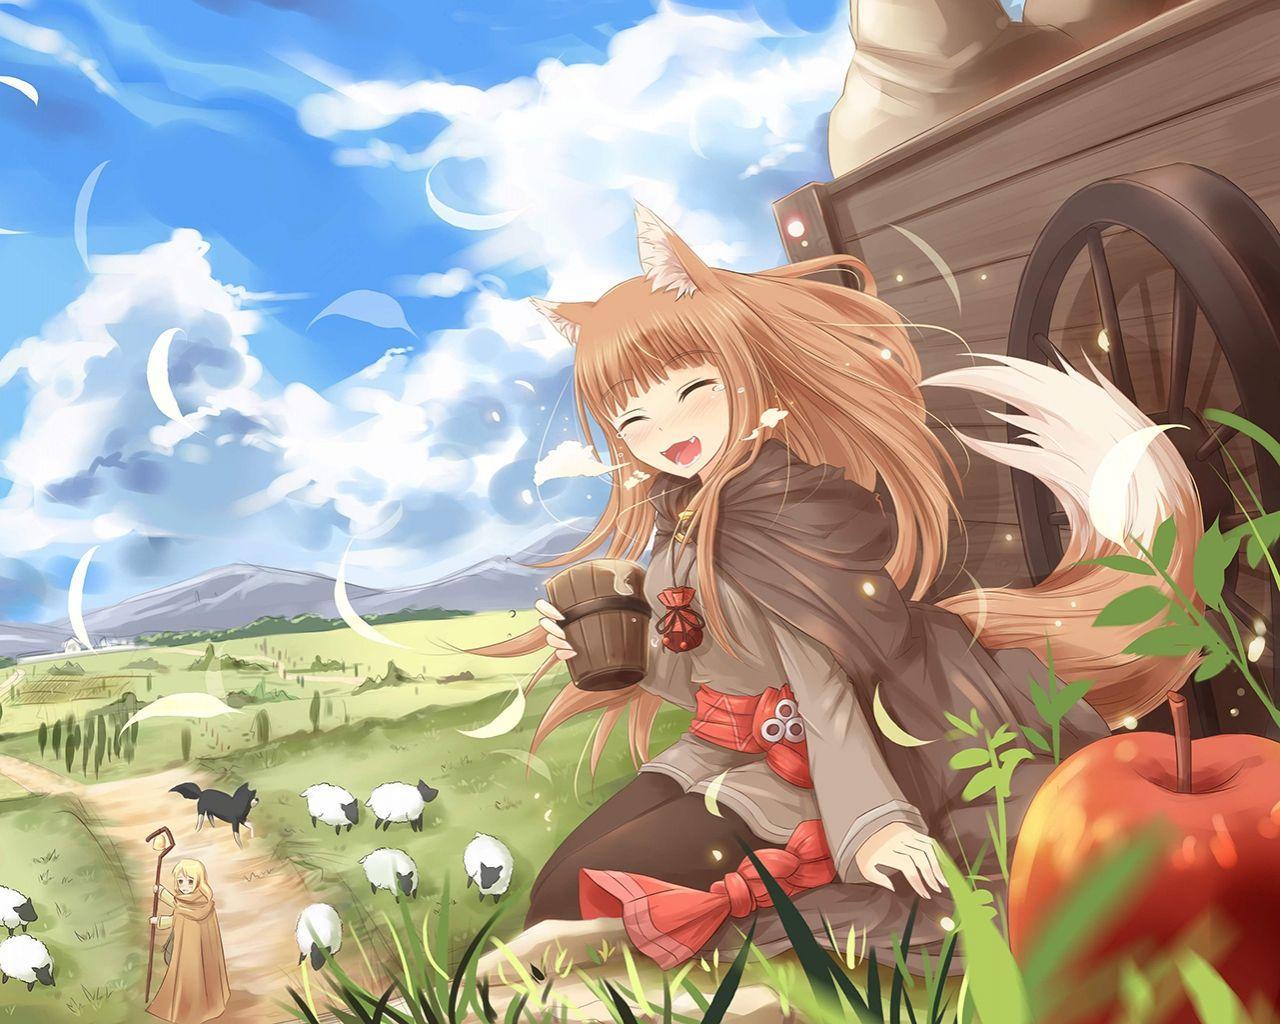 Anime Spice And Wolf wallpaper (Desktop, Phone, Tablet)